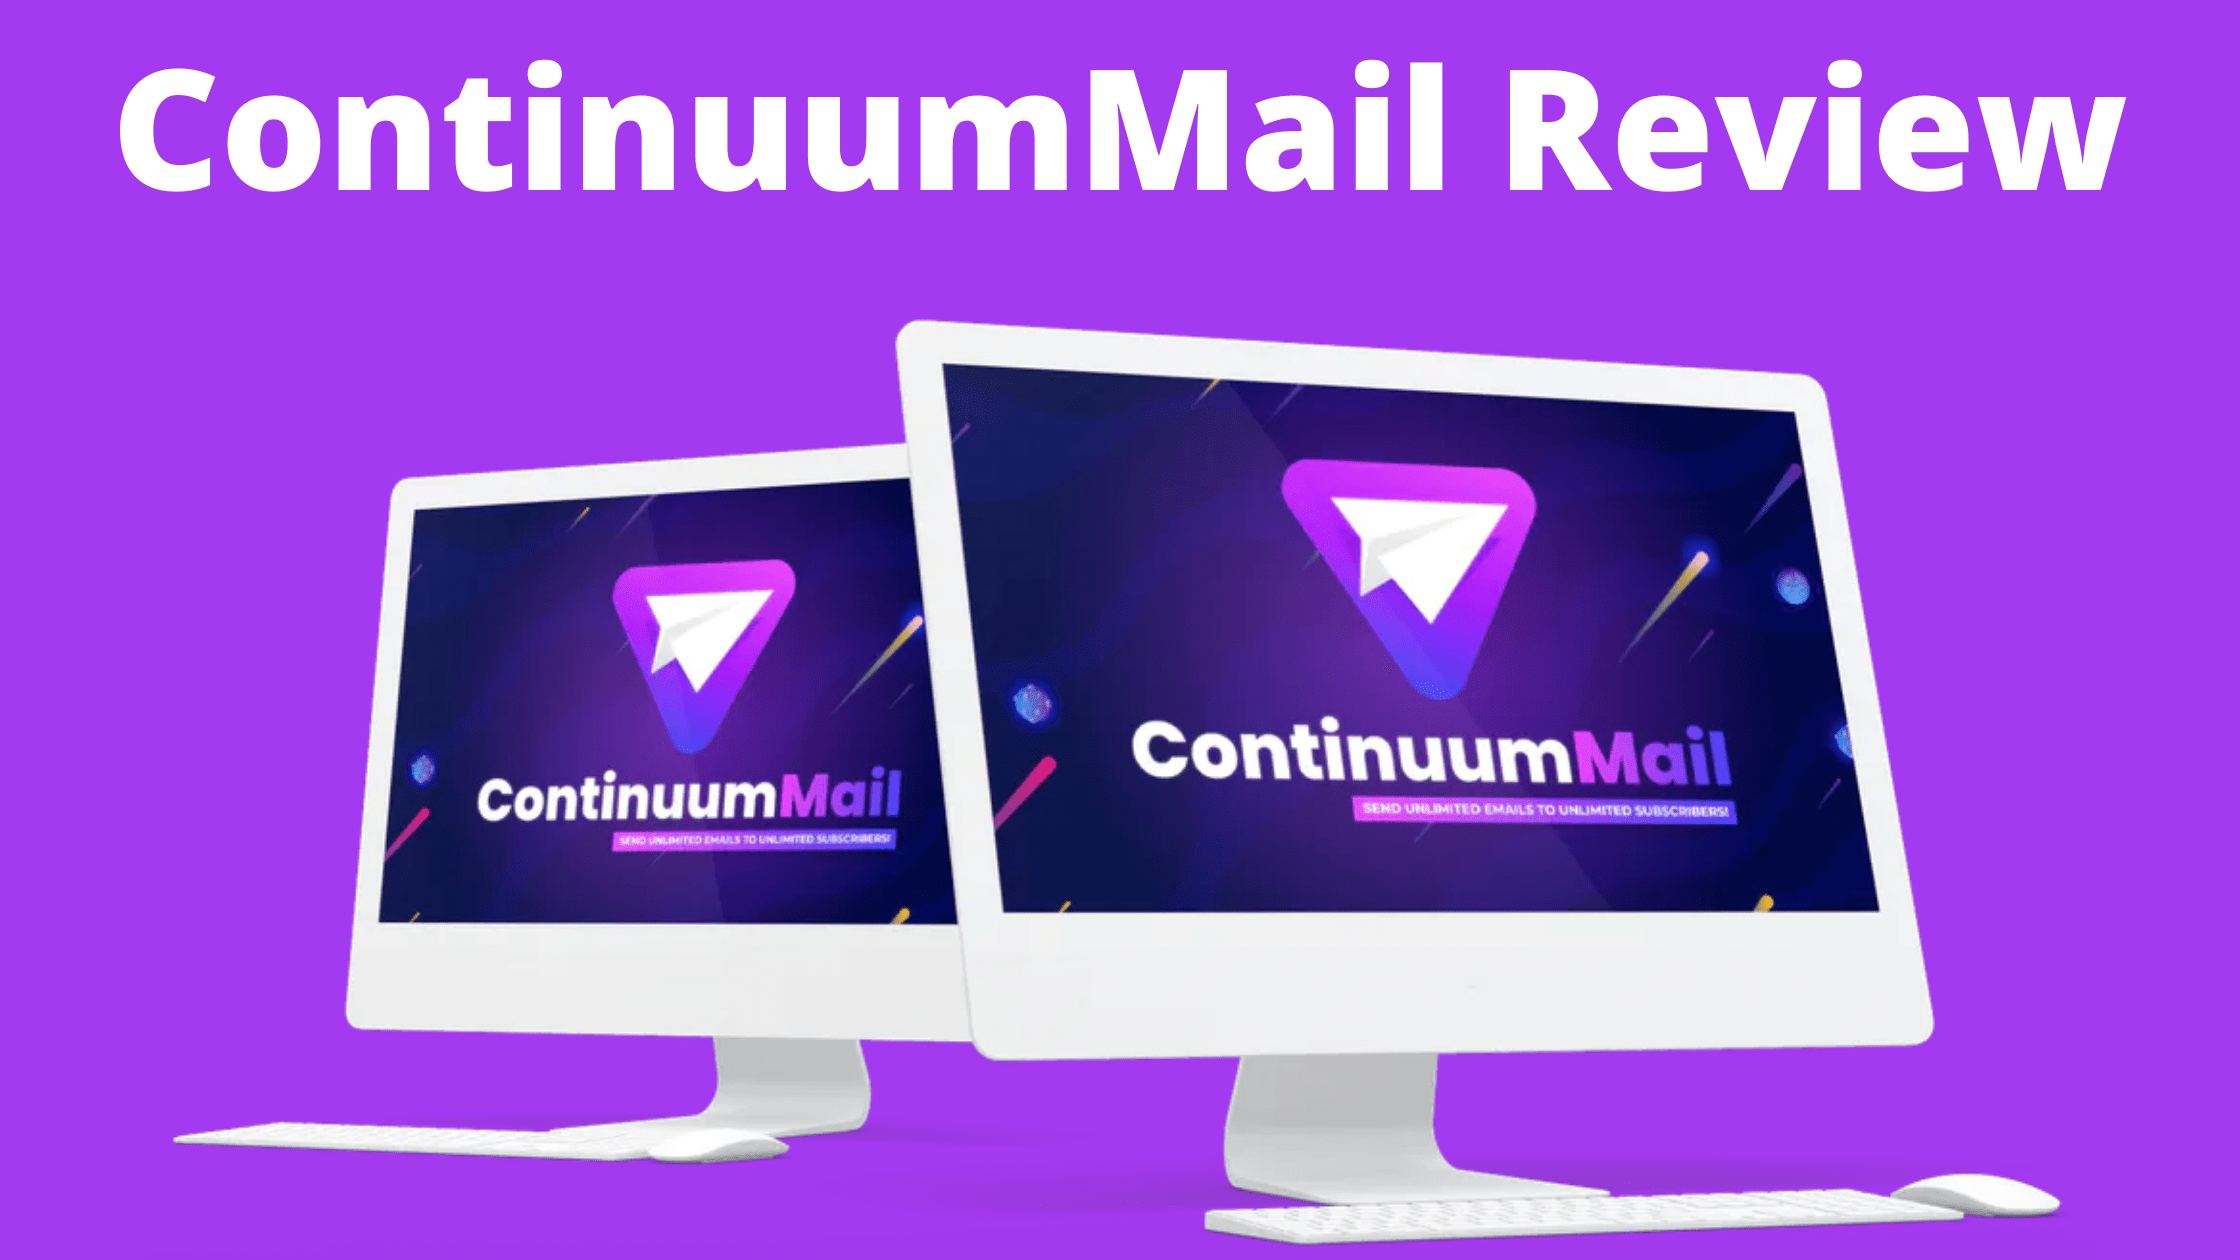 ContinuumMail Review